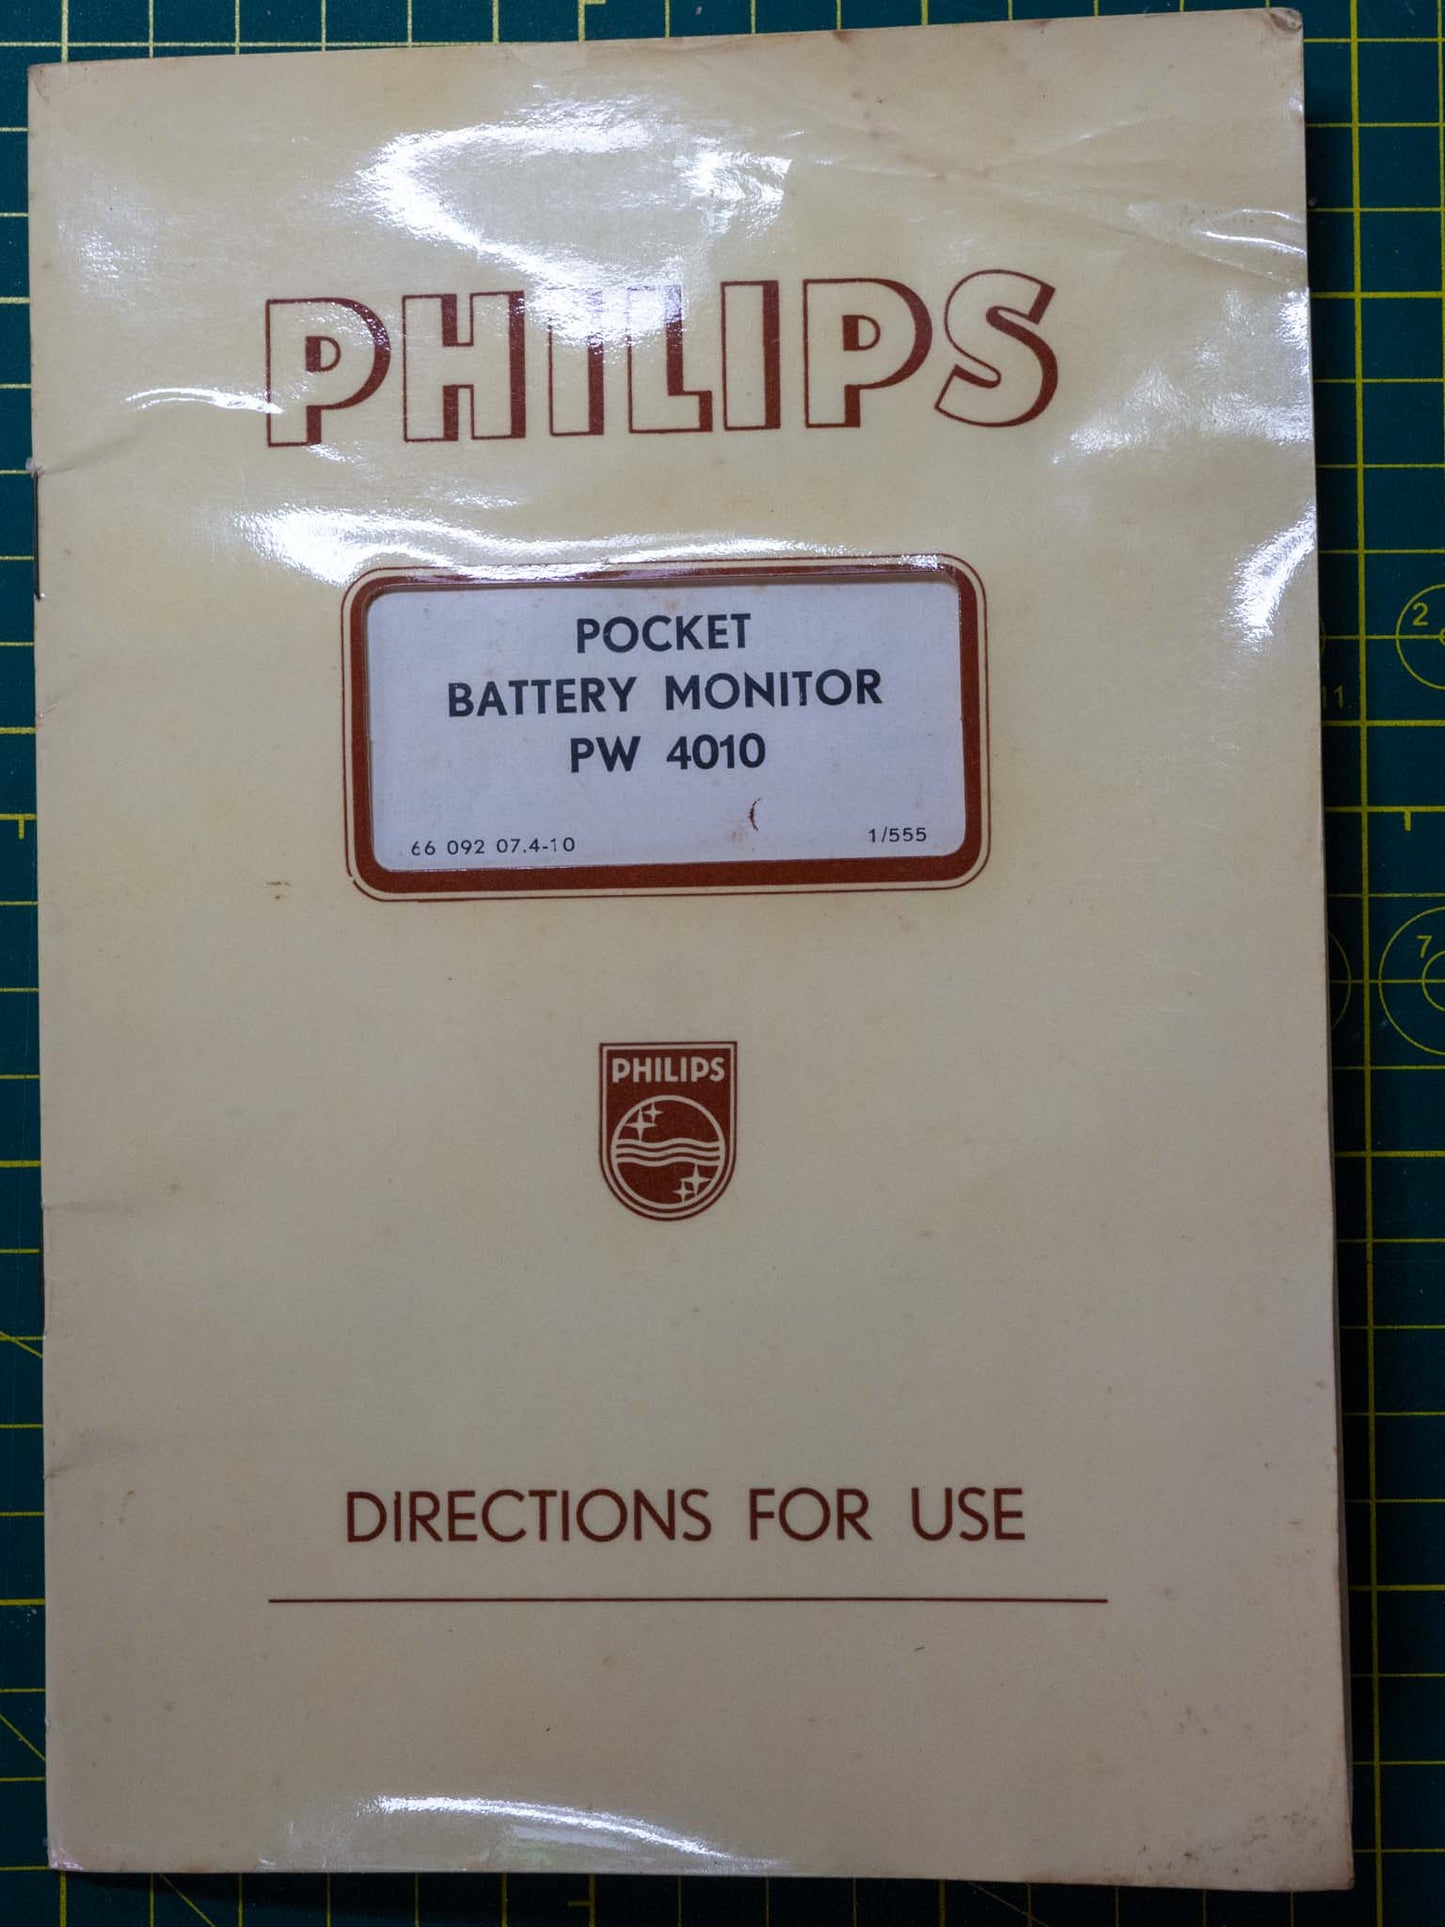 Vintage Phillips Pocket Battery Monitor PW4010 Geiger Counter